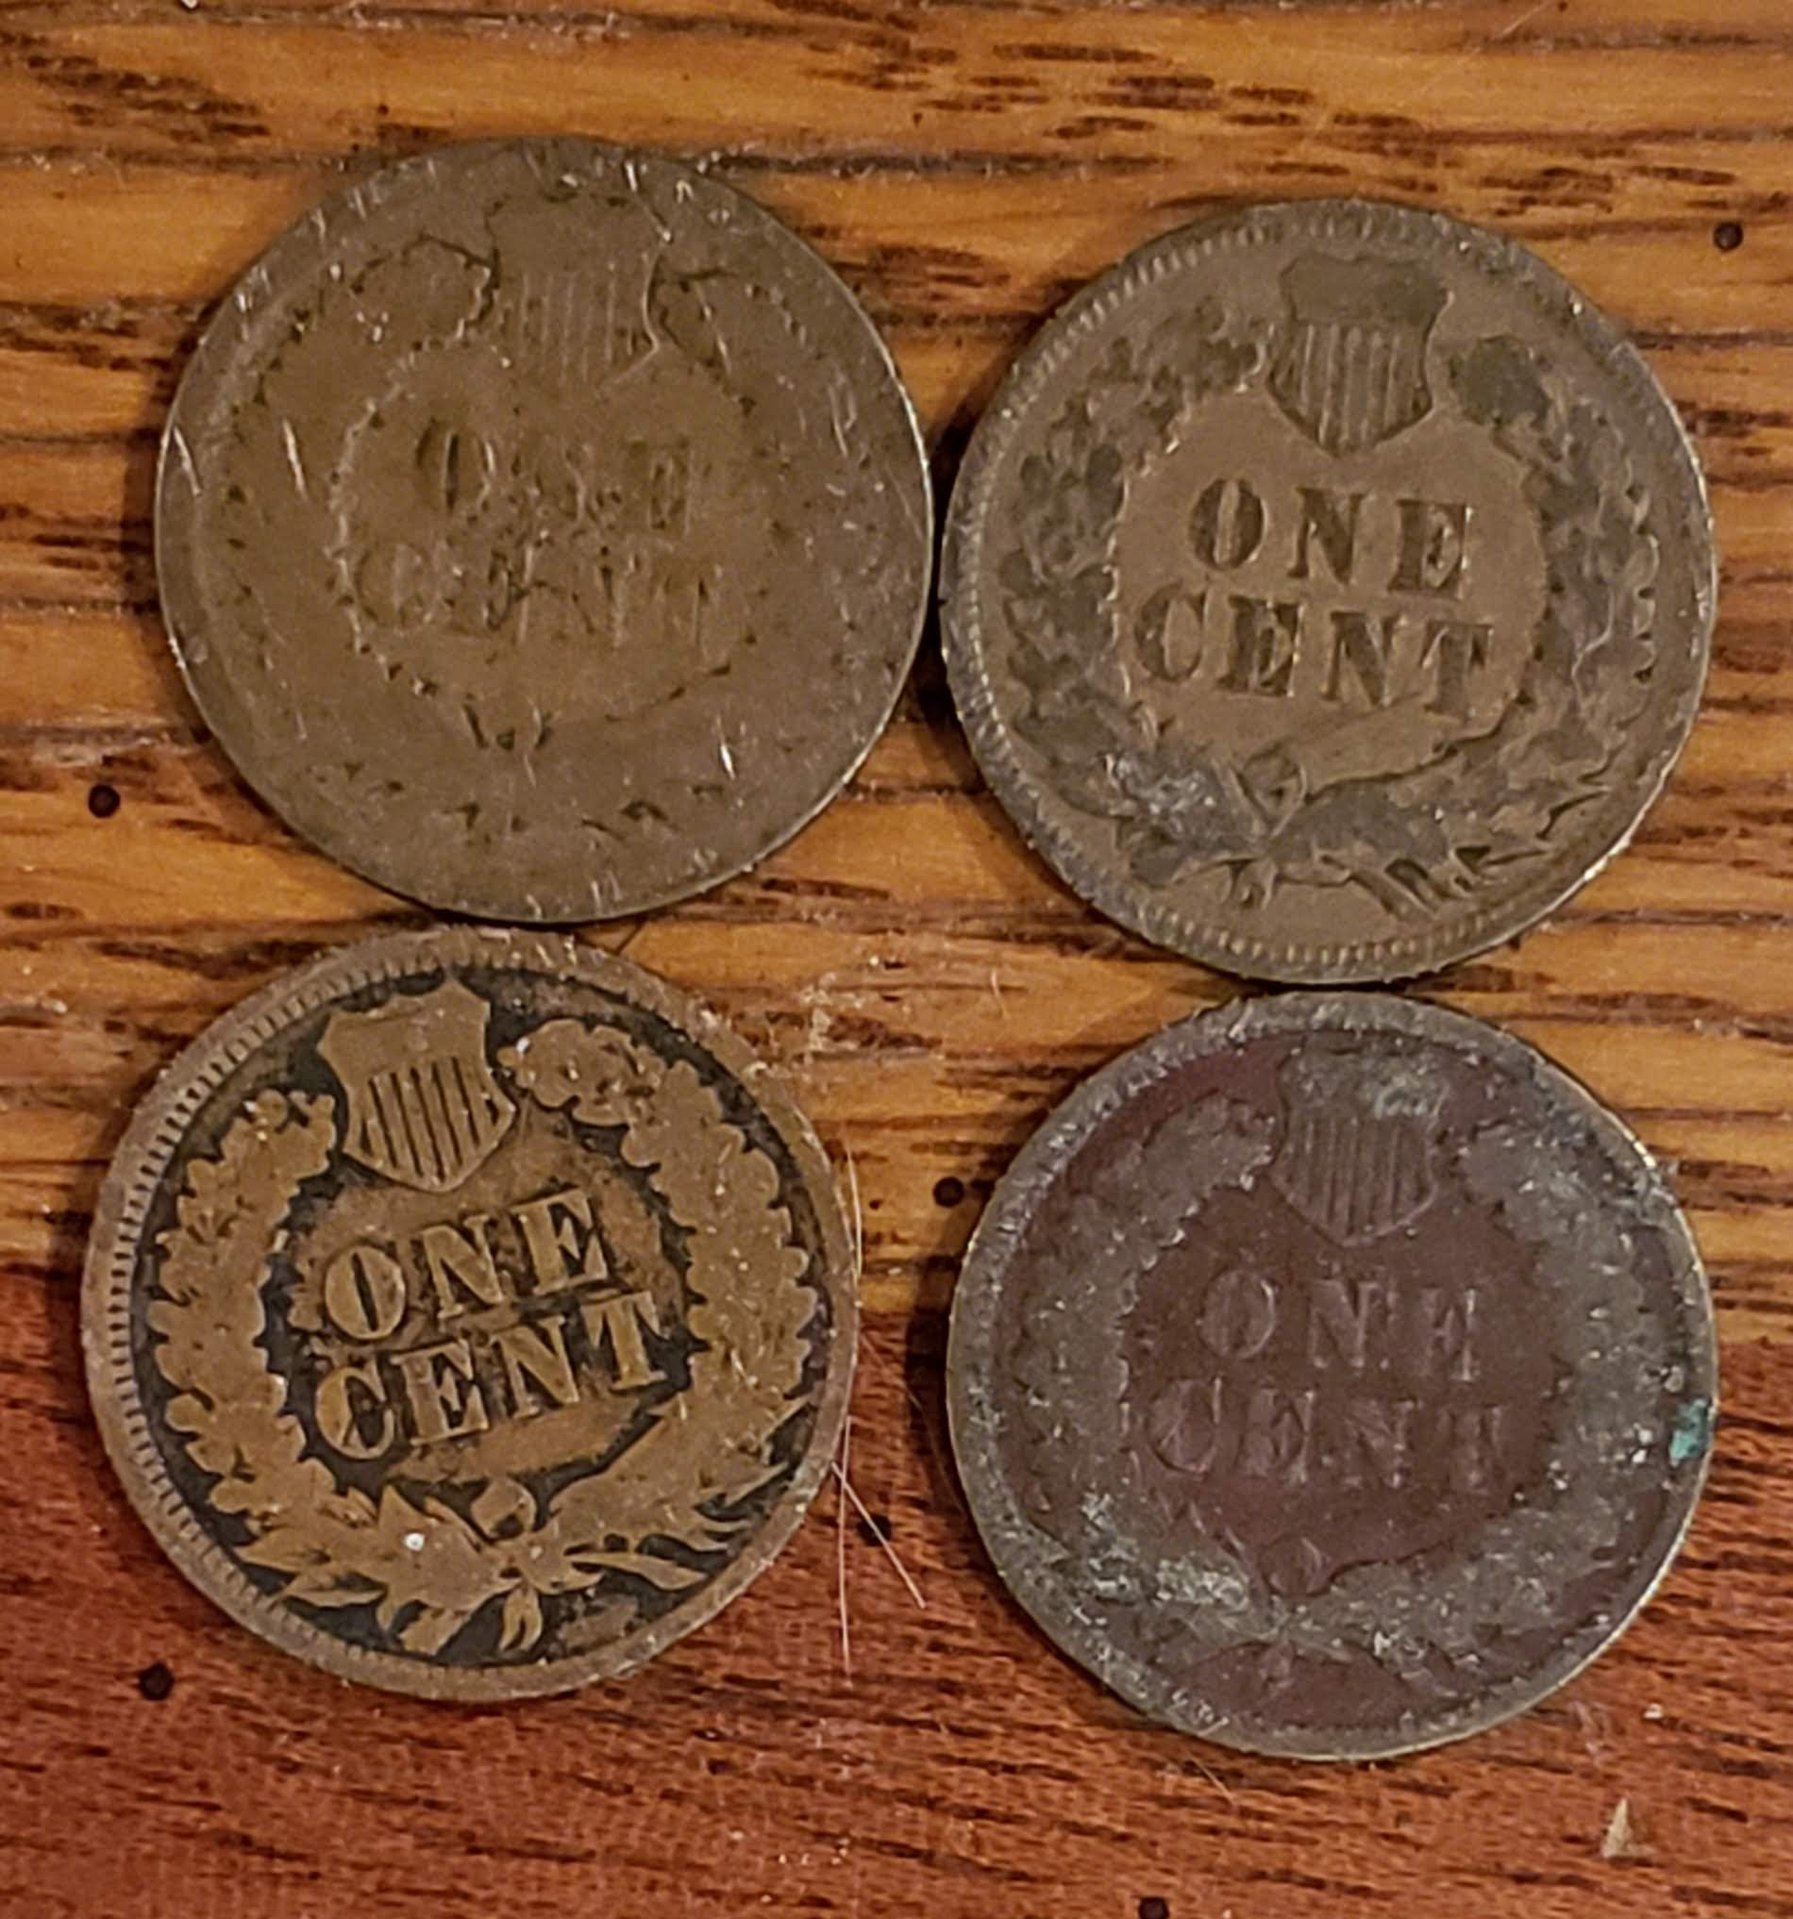 value-of-old-pennies-coin-talk